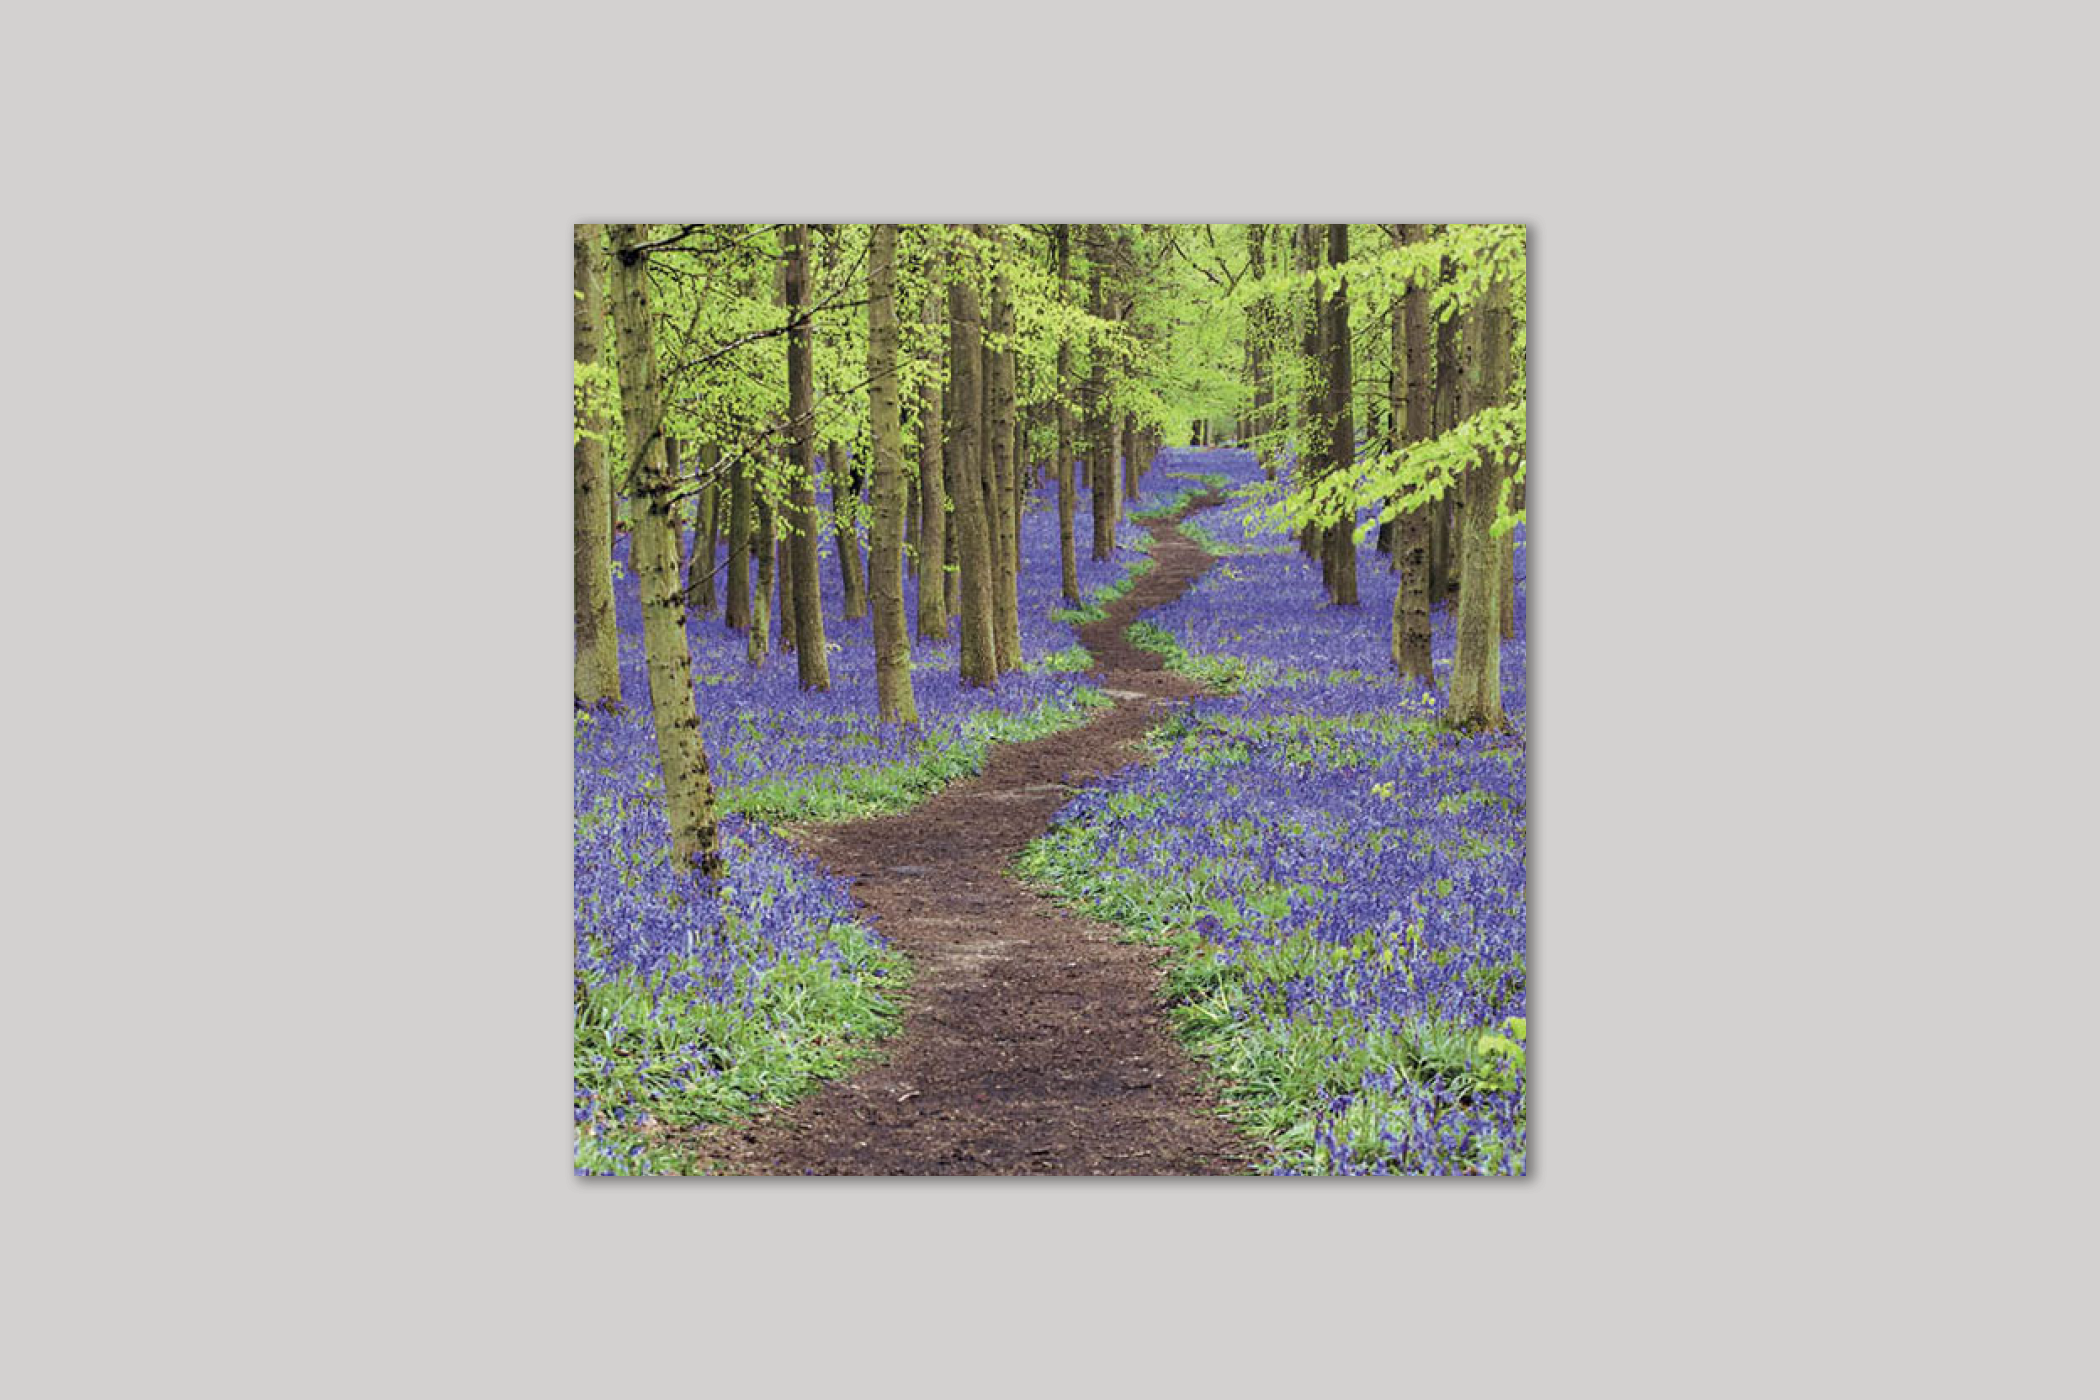 The Bluebell Wood from Exposure range of photographic cards by Icon.